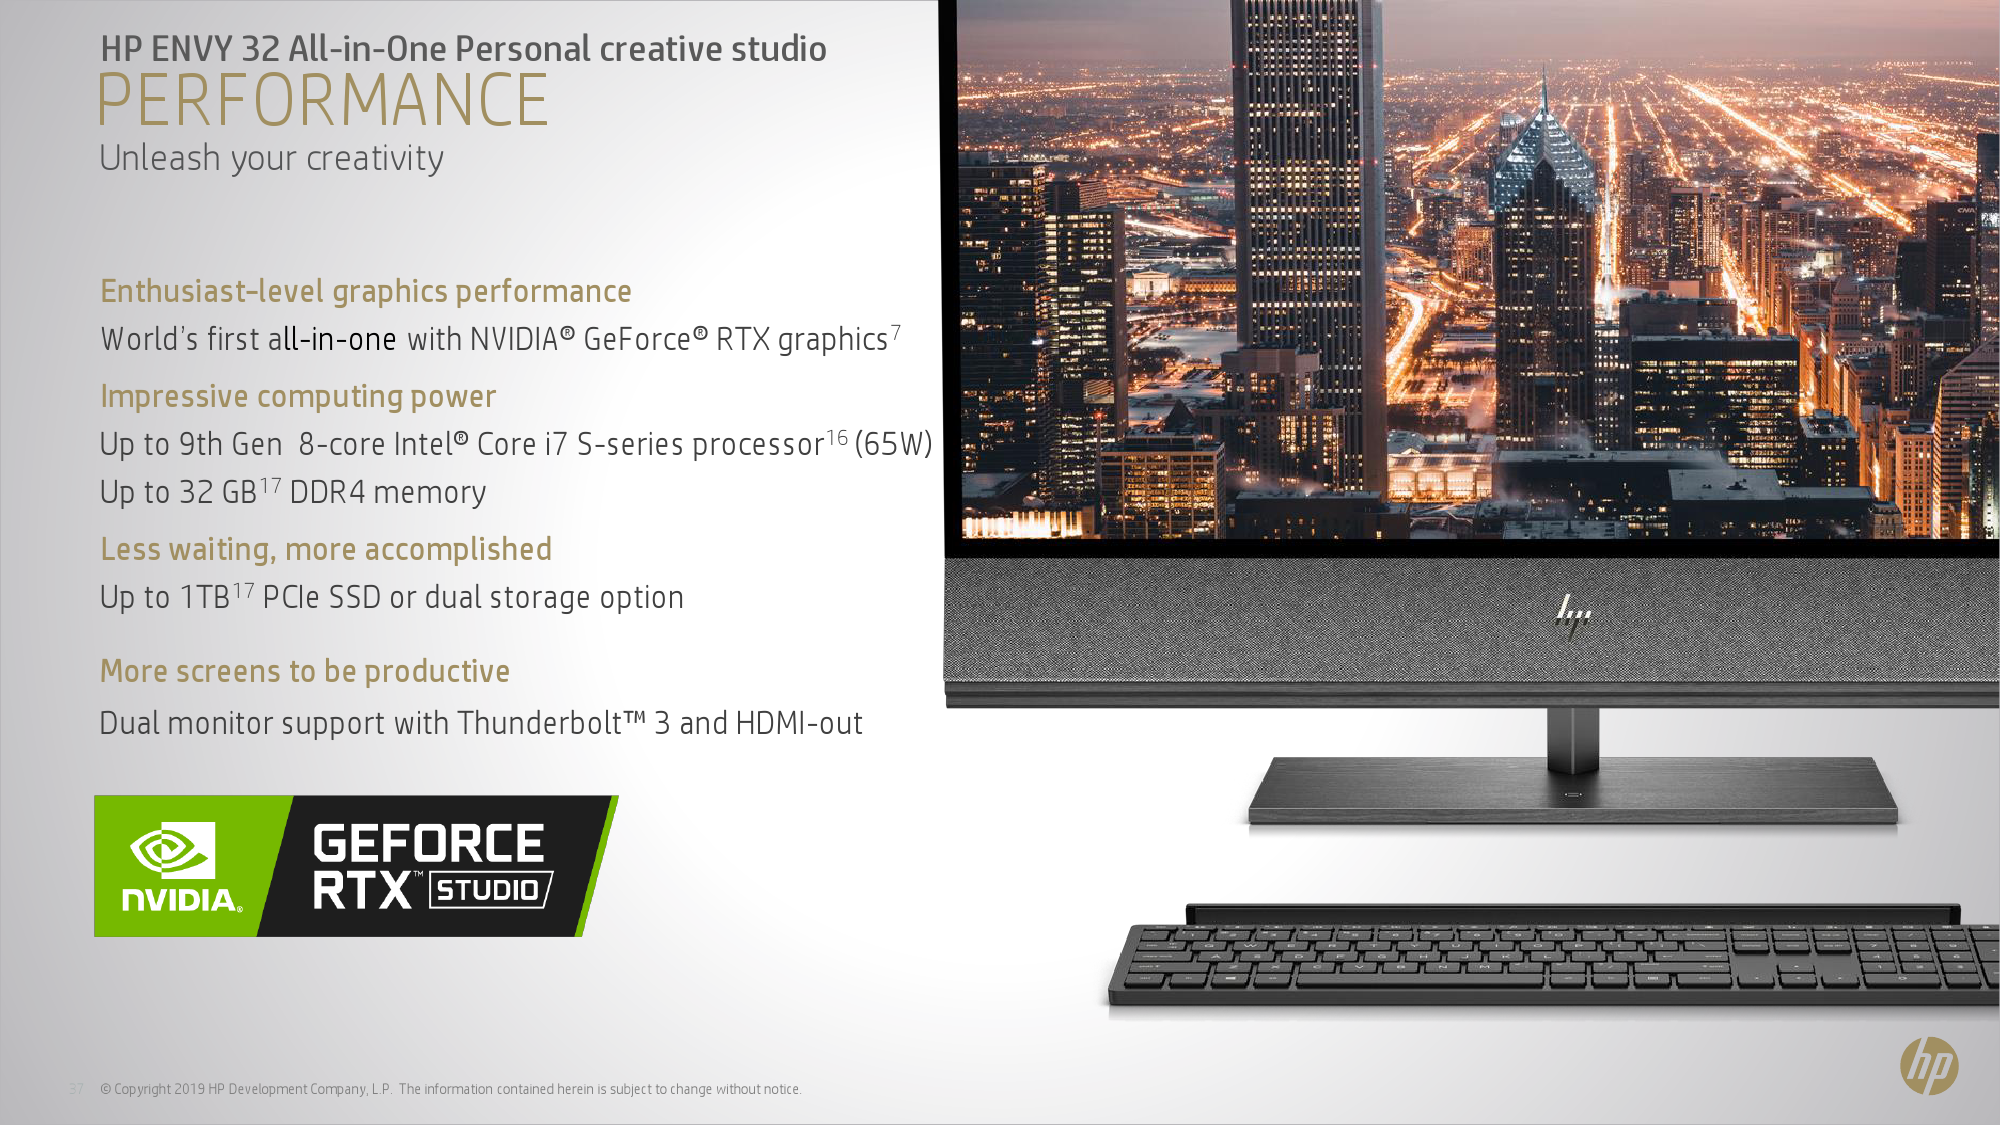 CES 2020: HP's Envy All-in-One 32 w/ Core i7, GeForce RTX 2080 